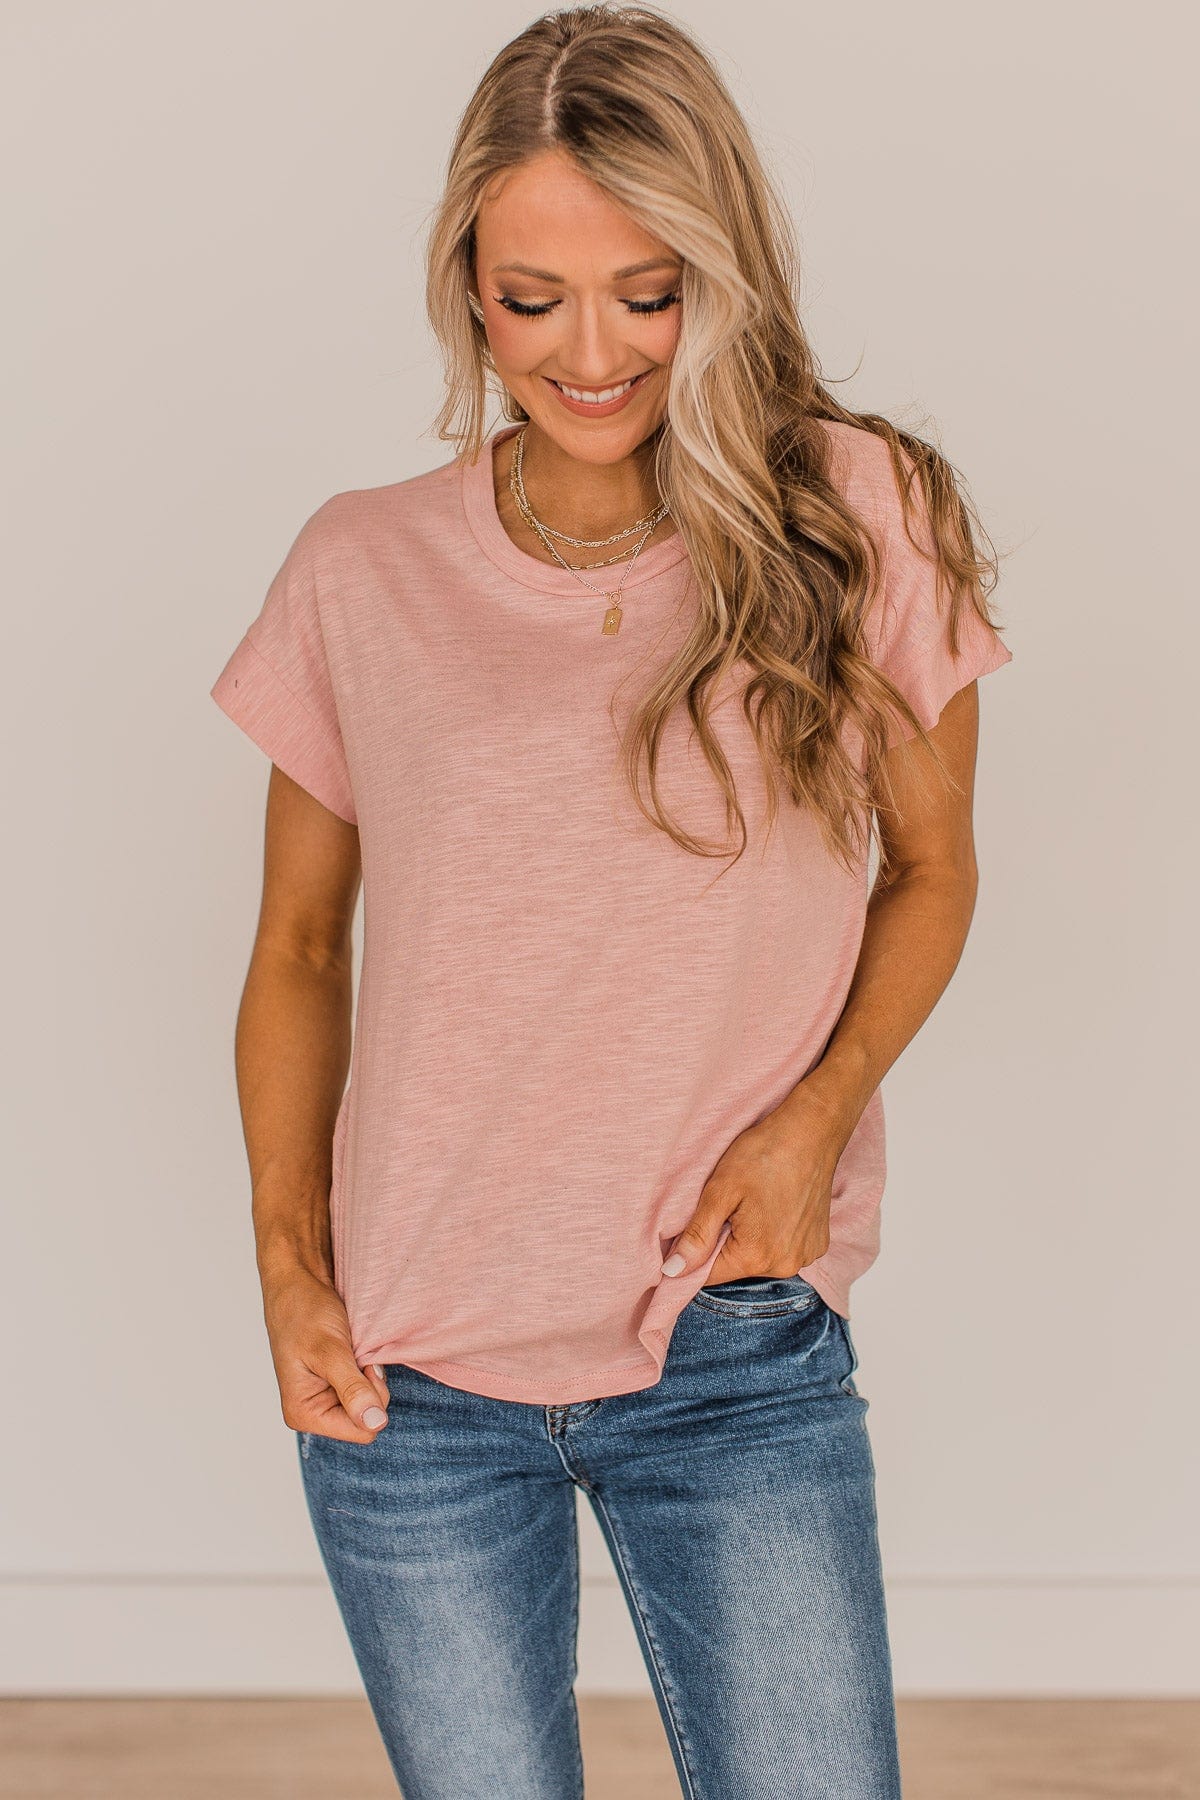 Find Your Shine Short Sleeve Top- Light Pink